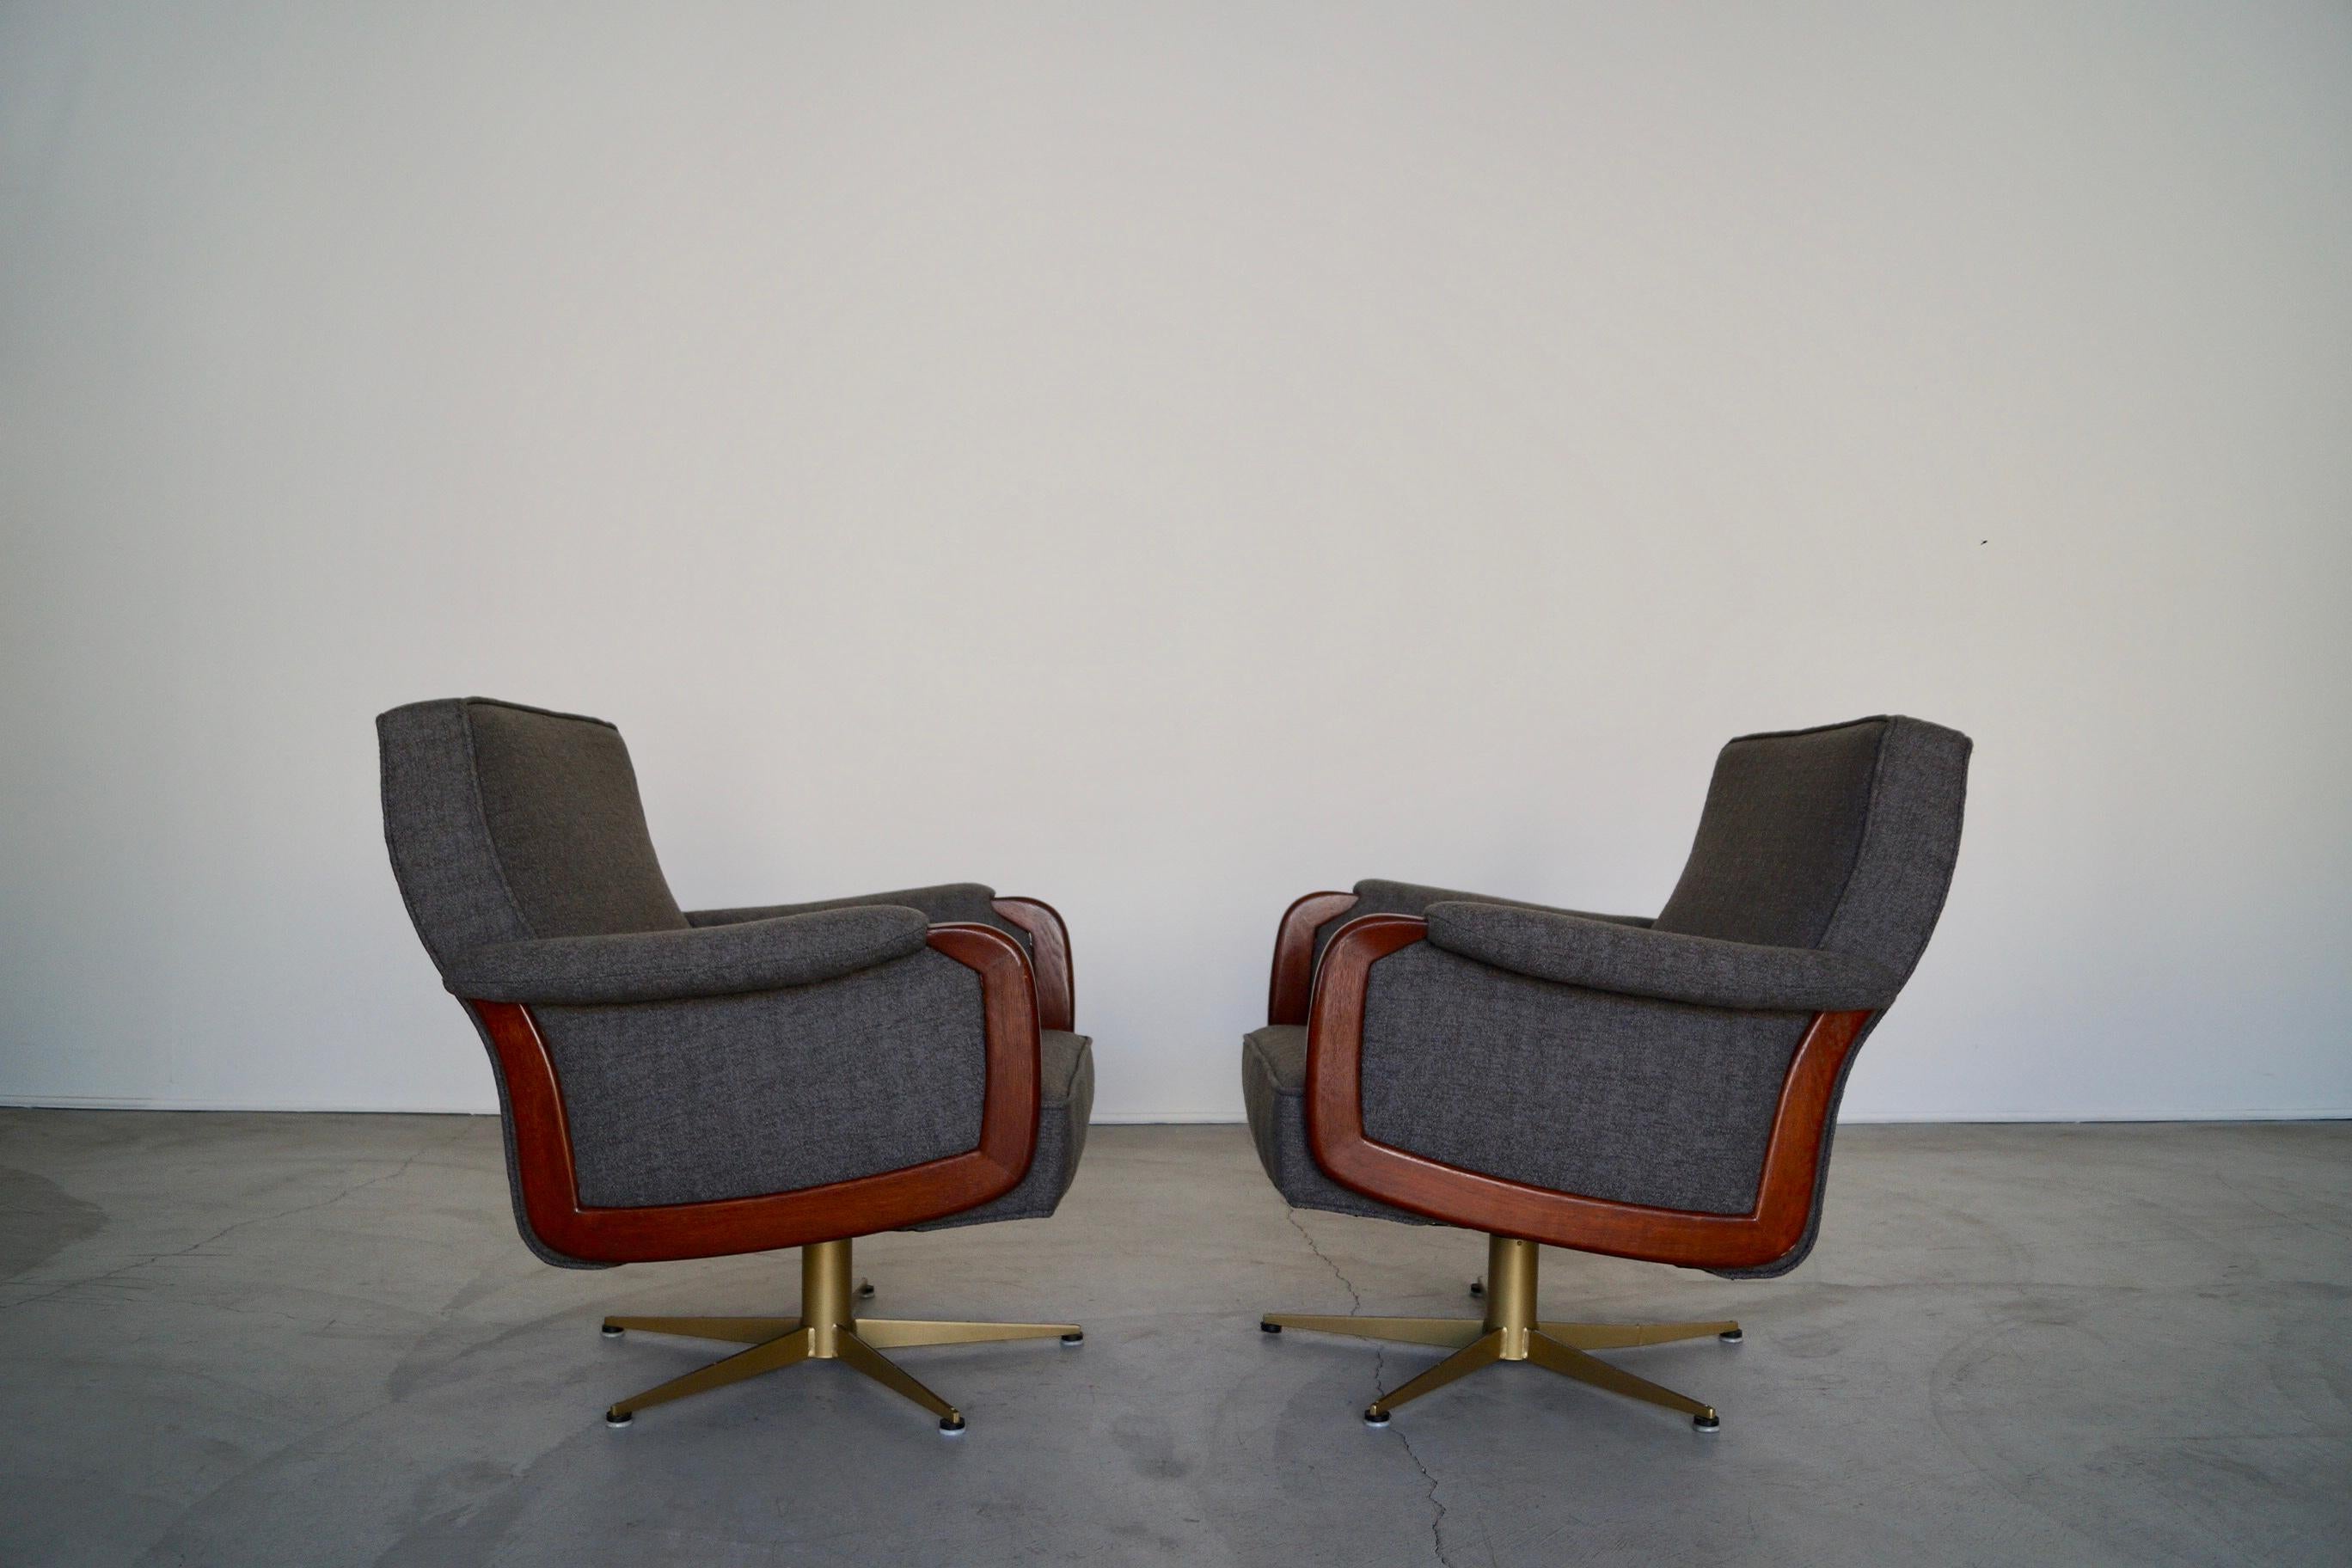 1970's Mid-Century Modern Swivel Lounge Chairs - a Pair For Sale 3